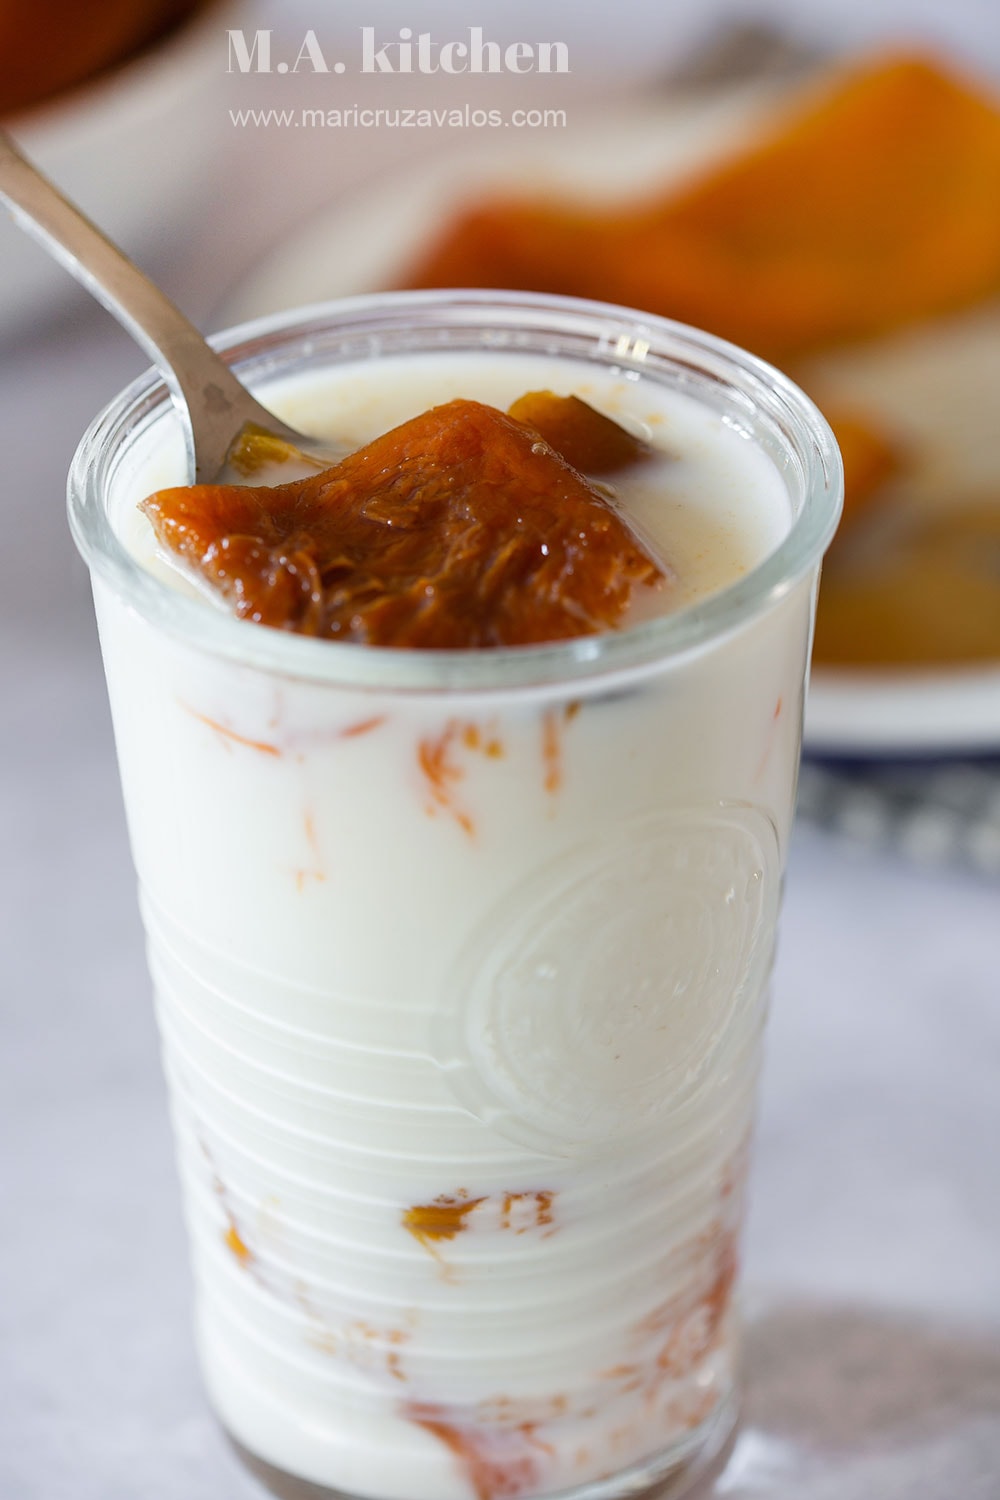 A glass of milk with Mexican candied pumpkin inside.